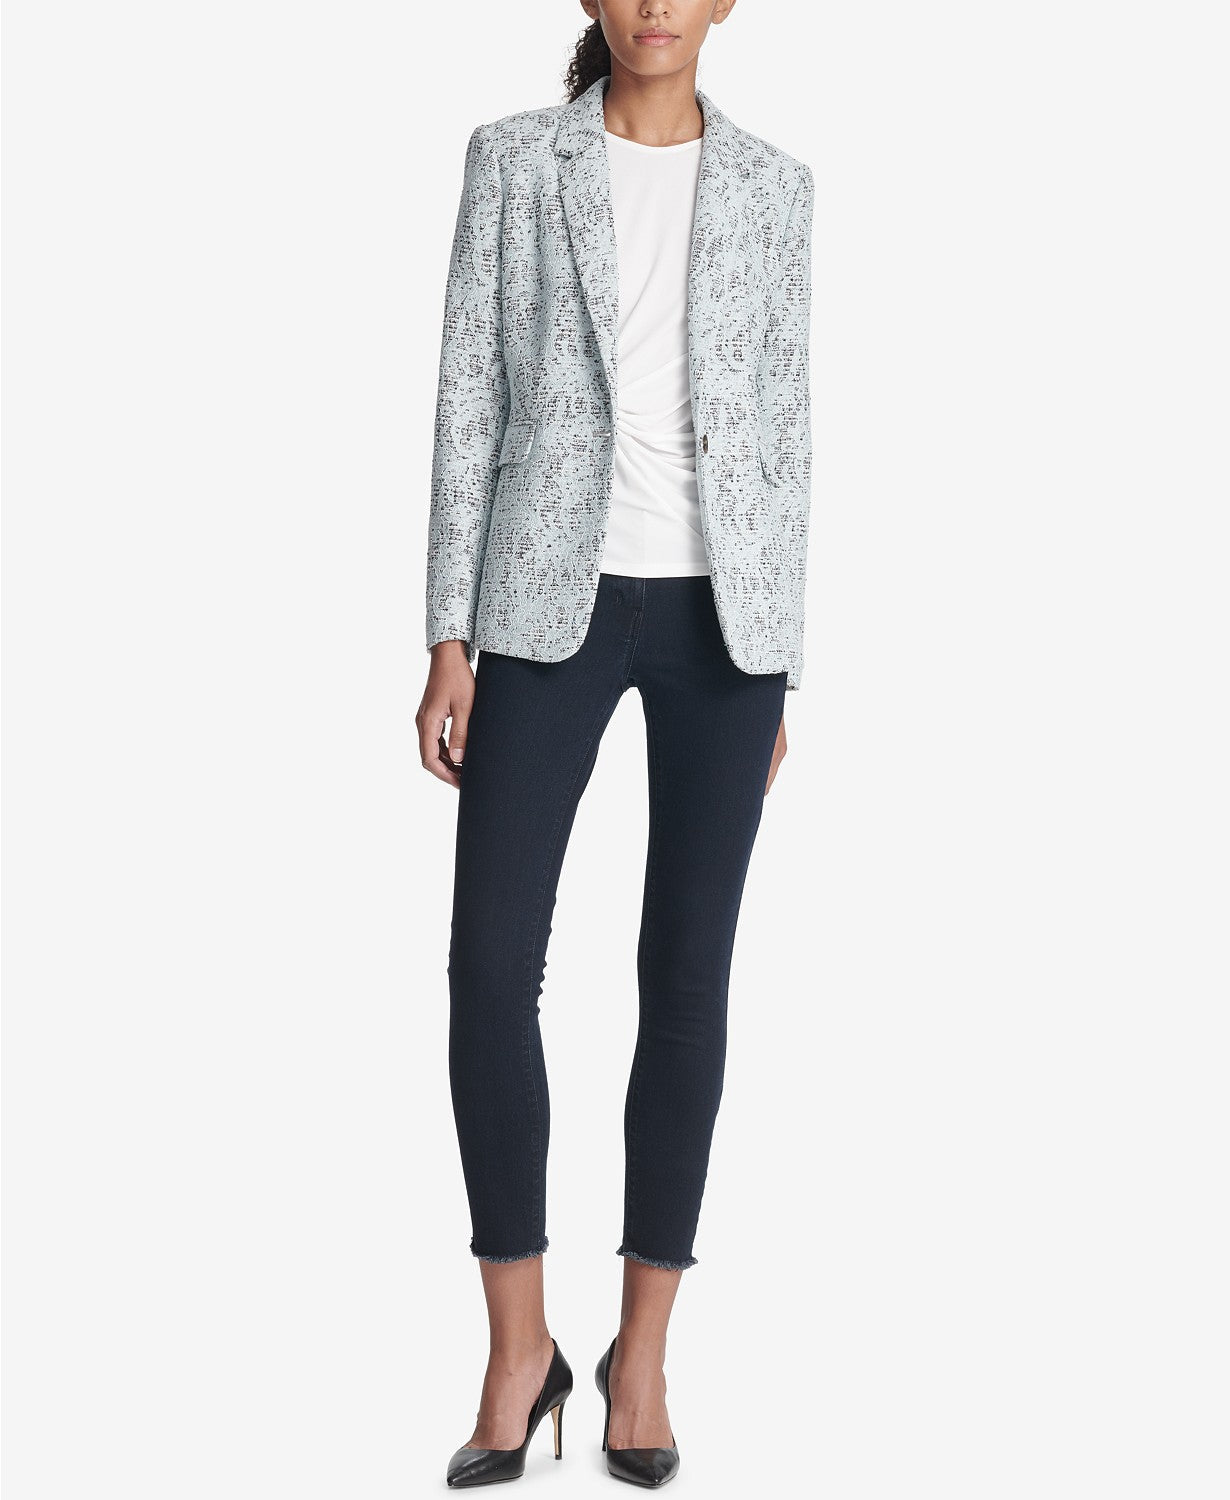 DKNY Womens Bonded Lace One Button Coat